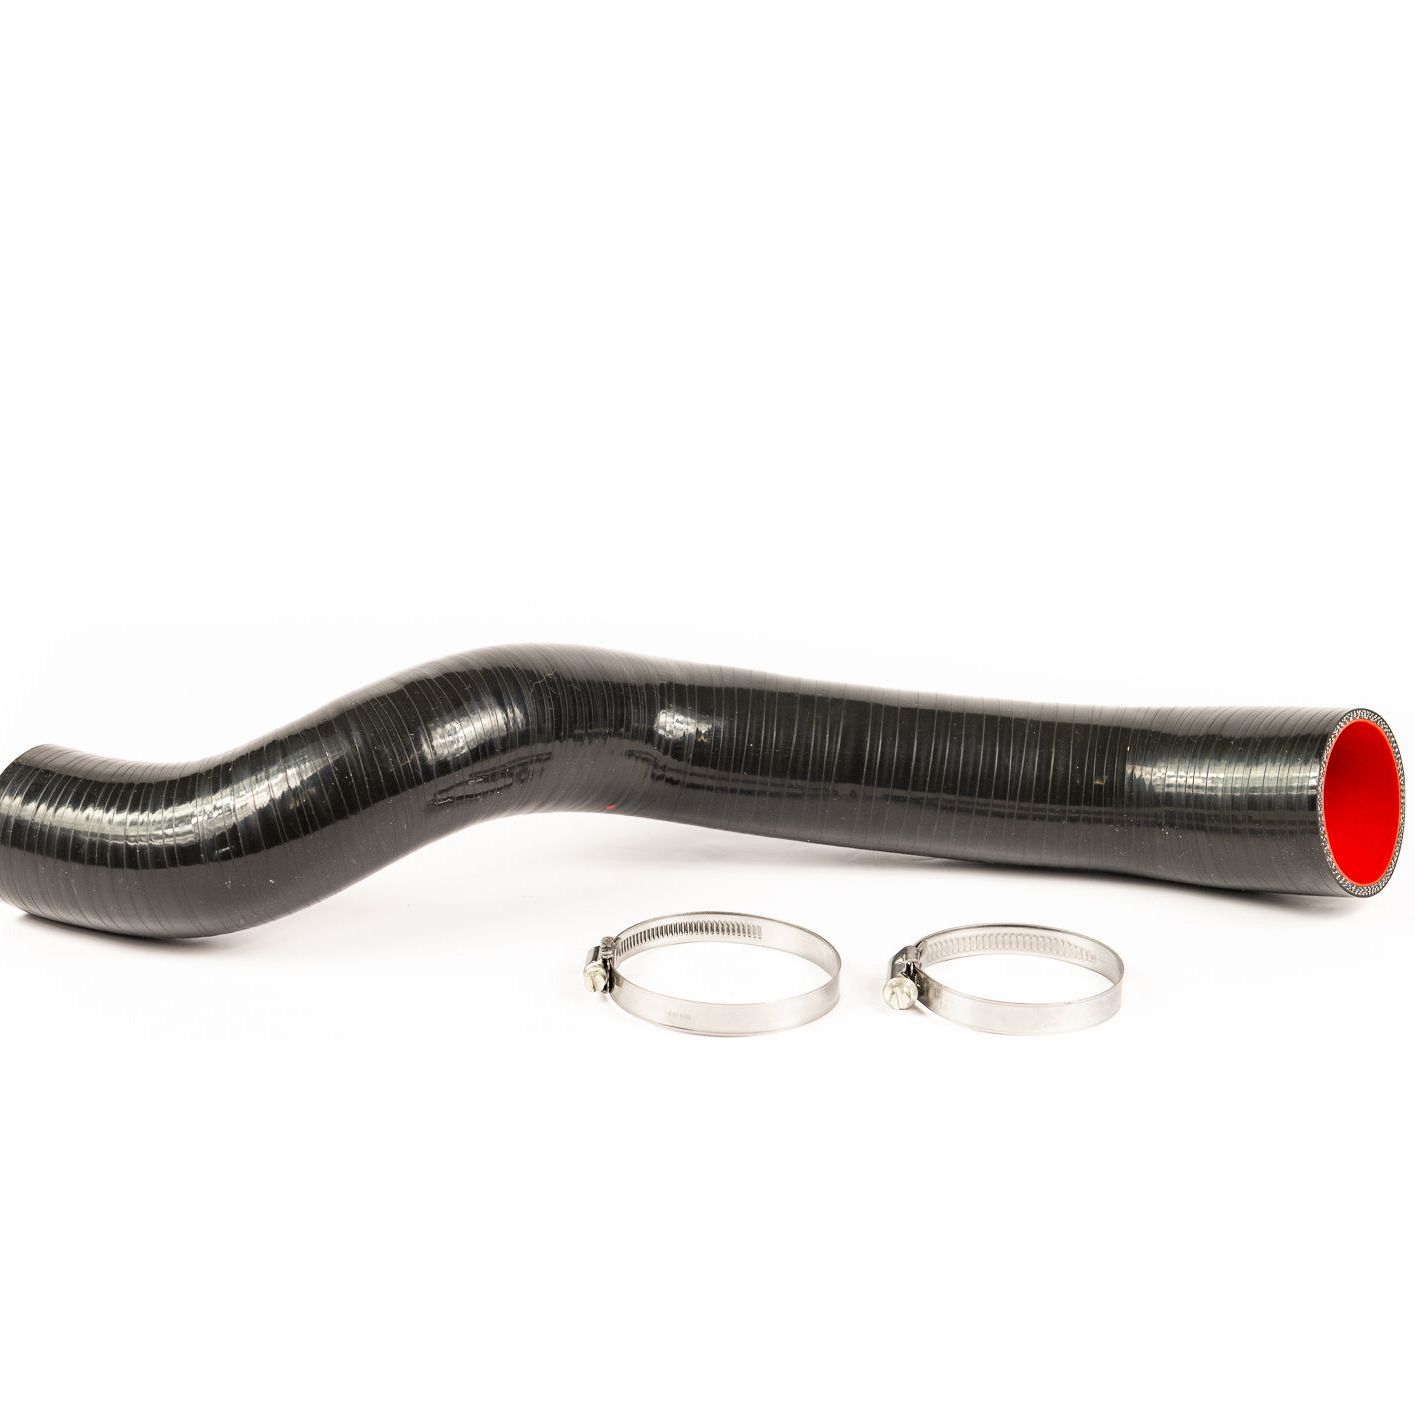 Cold Side Intercooler Hose Replacement (suits Ford Ranger / BT50)